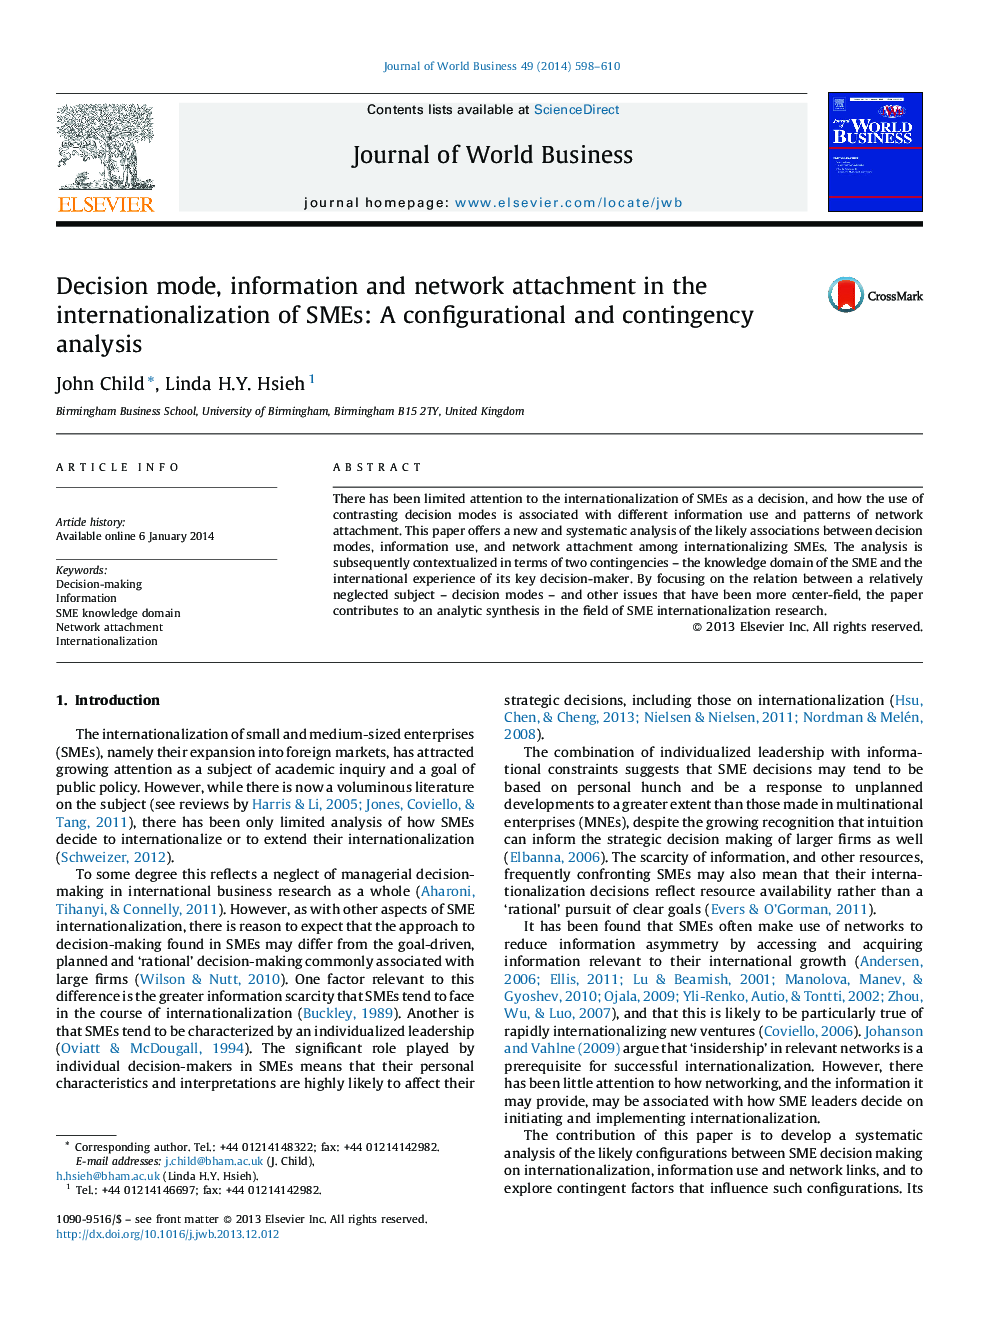 Decision mode, information and network attachment in the internationalization of SMEs: A configurational and contingency analysis